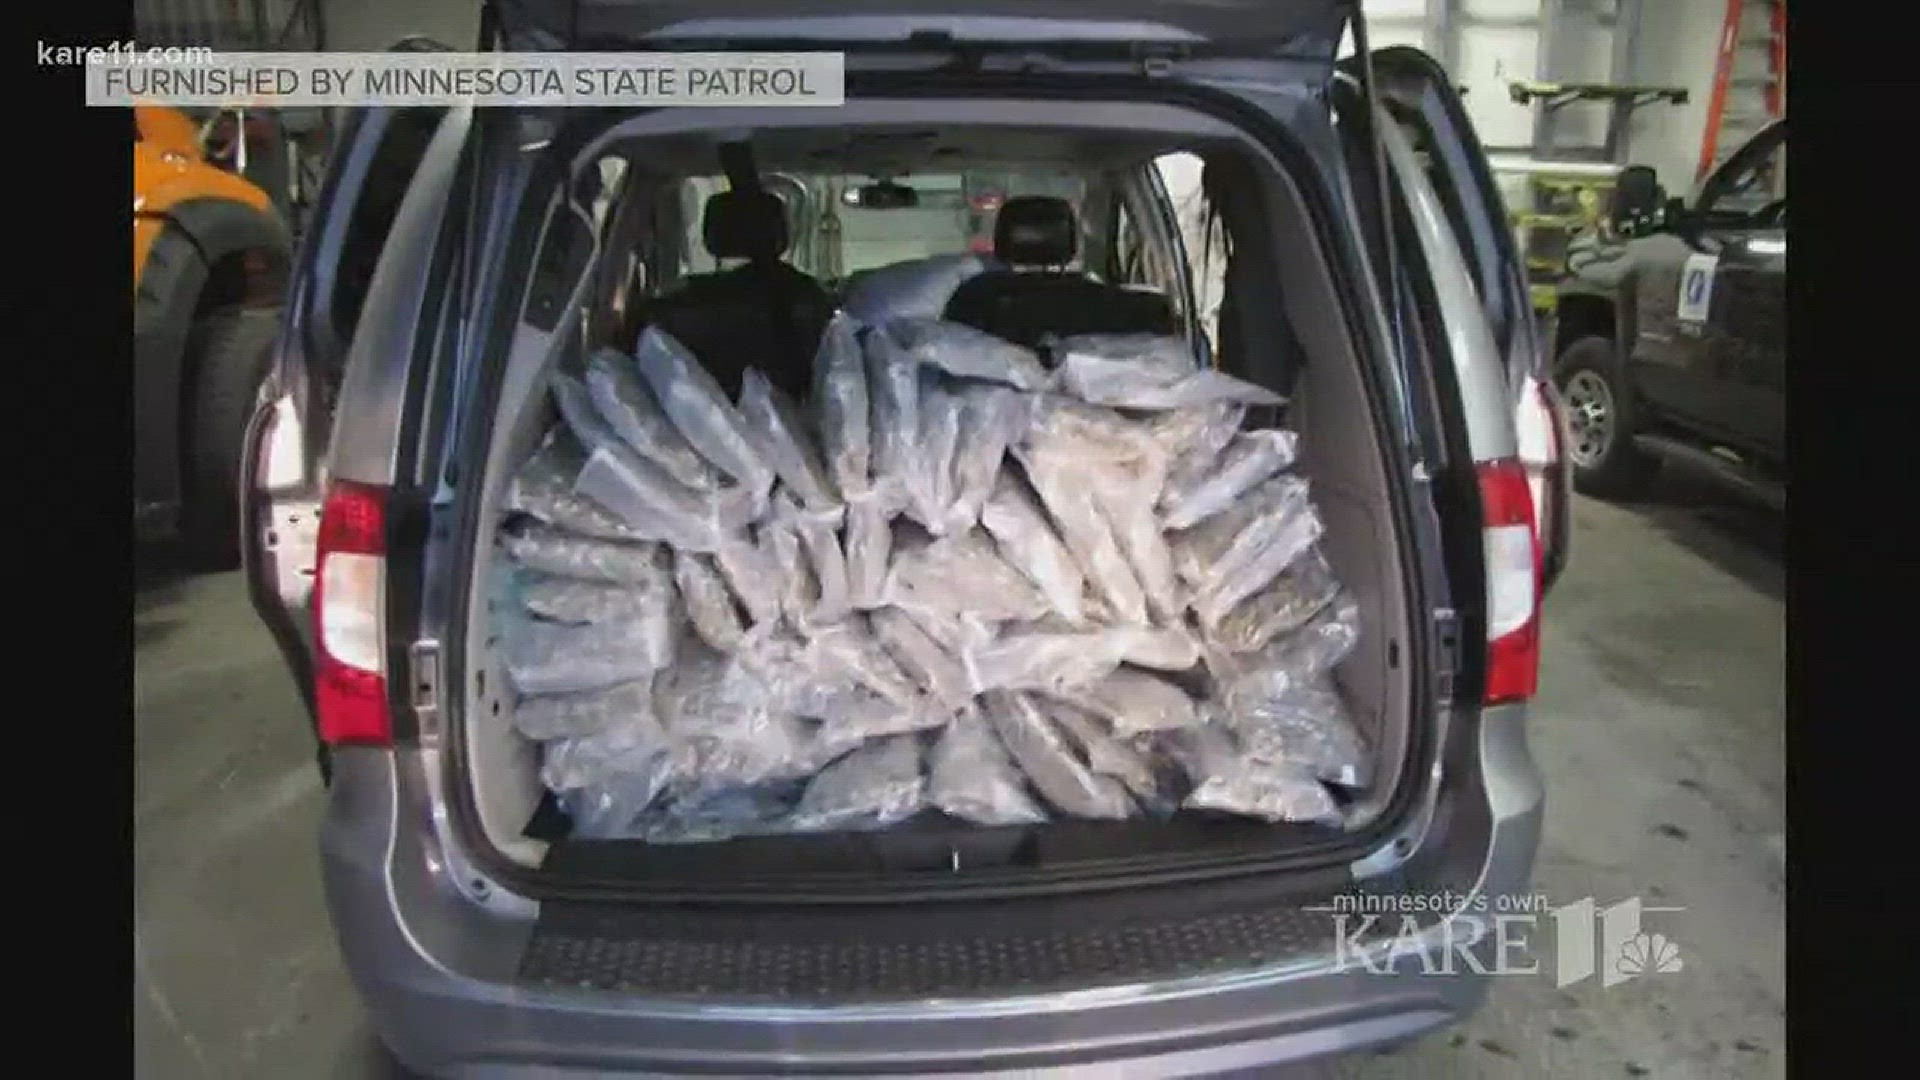 The Minnesota State Patrol says troopers have confiscated hundreds of pounds of marijuana in the past few weeks, discovering the drugs following traffic stops.